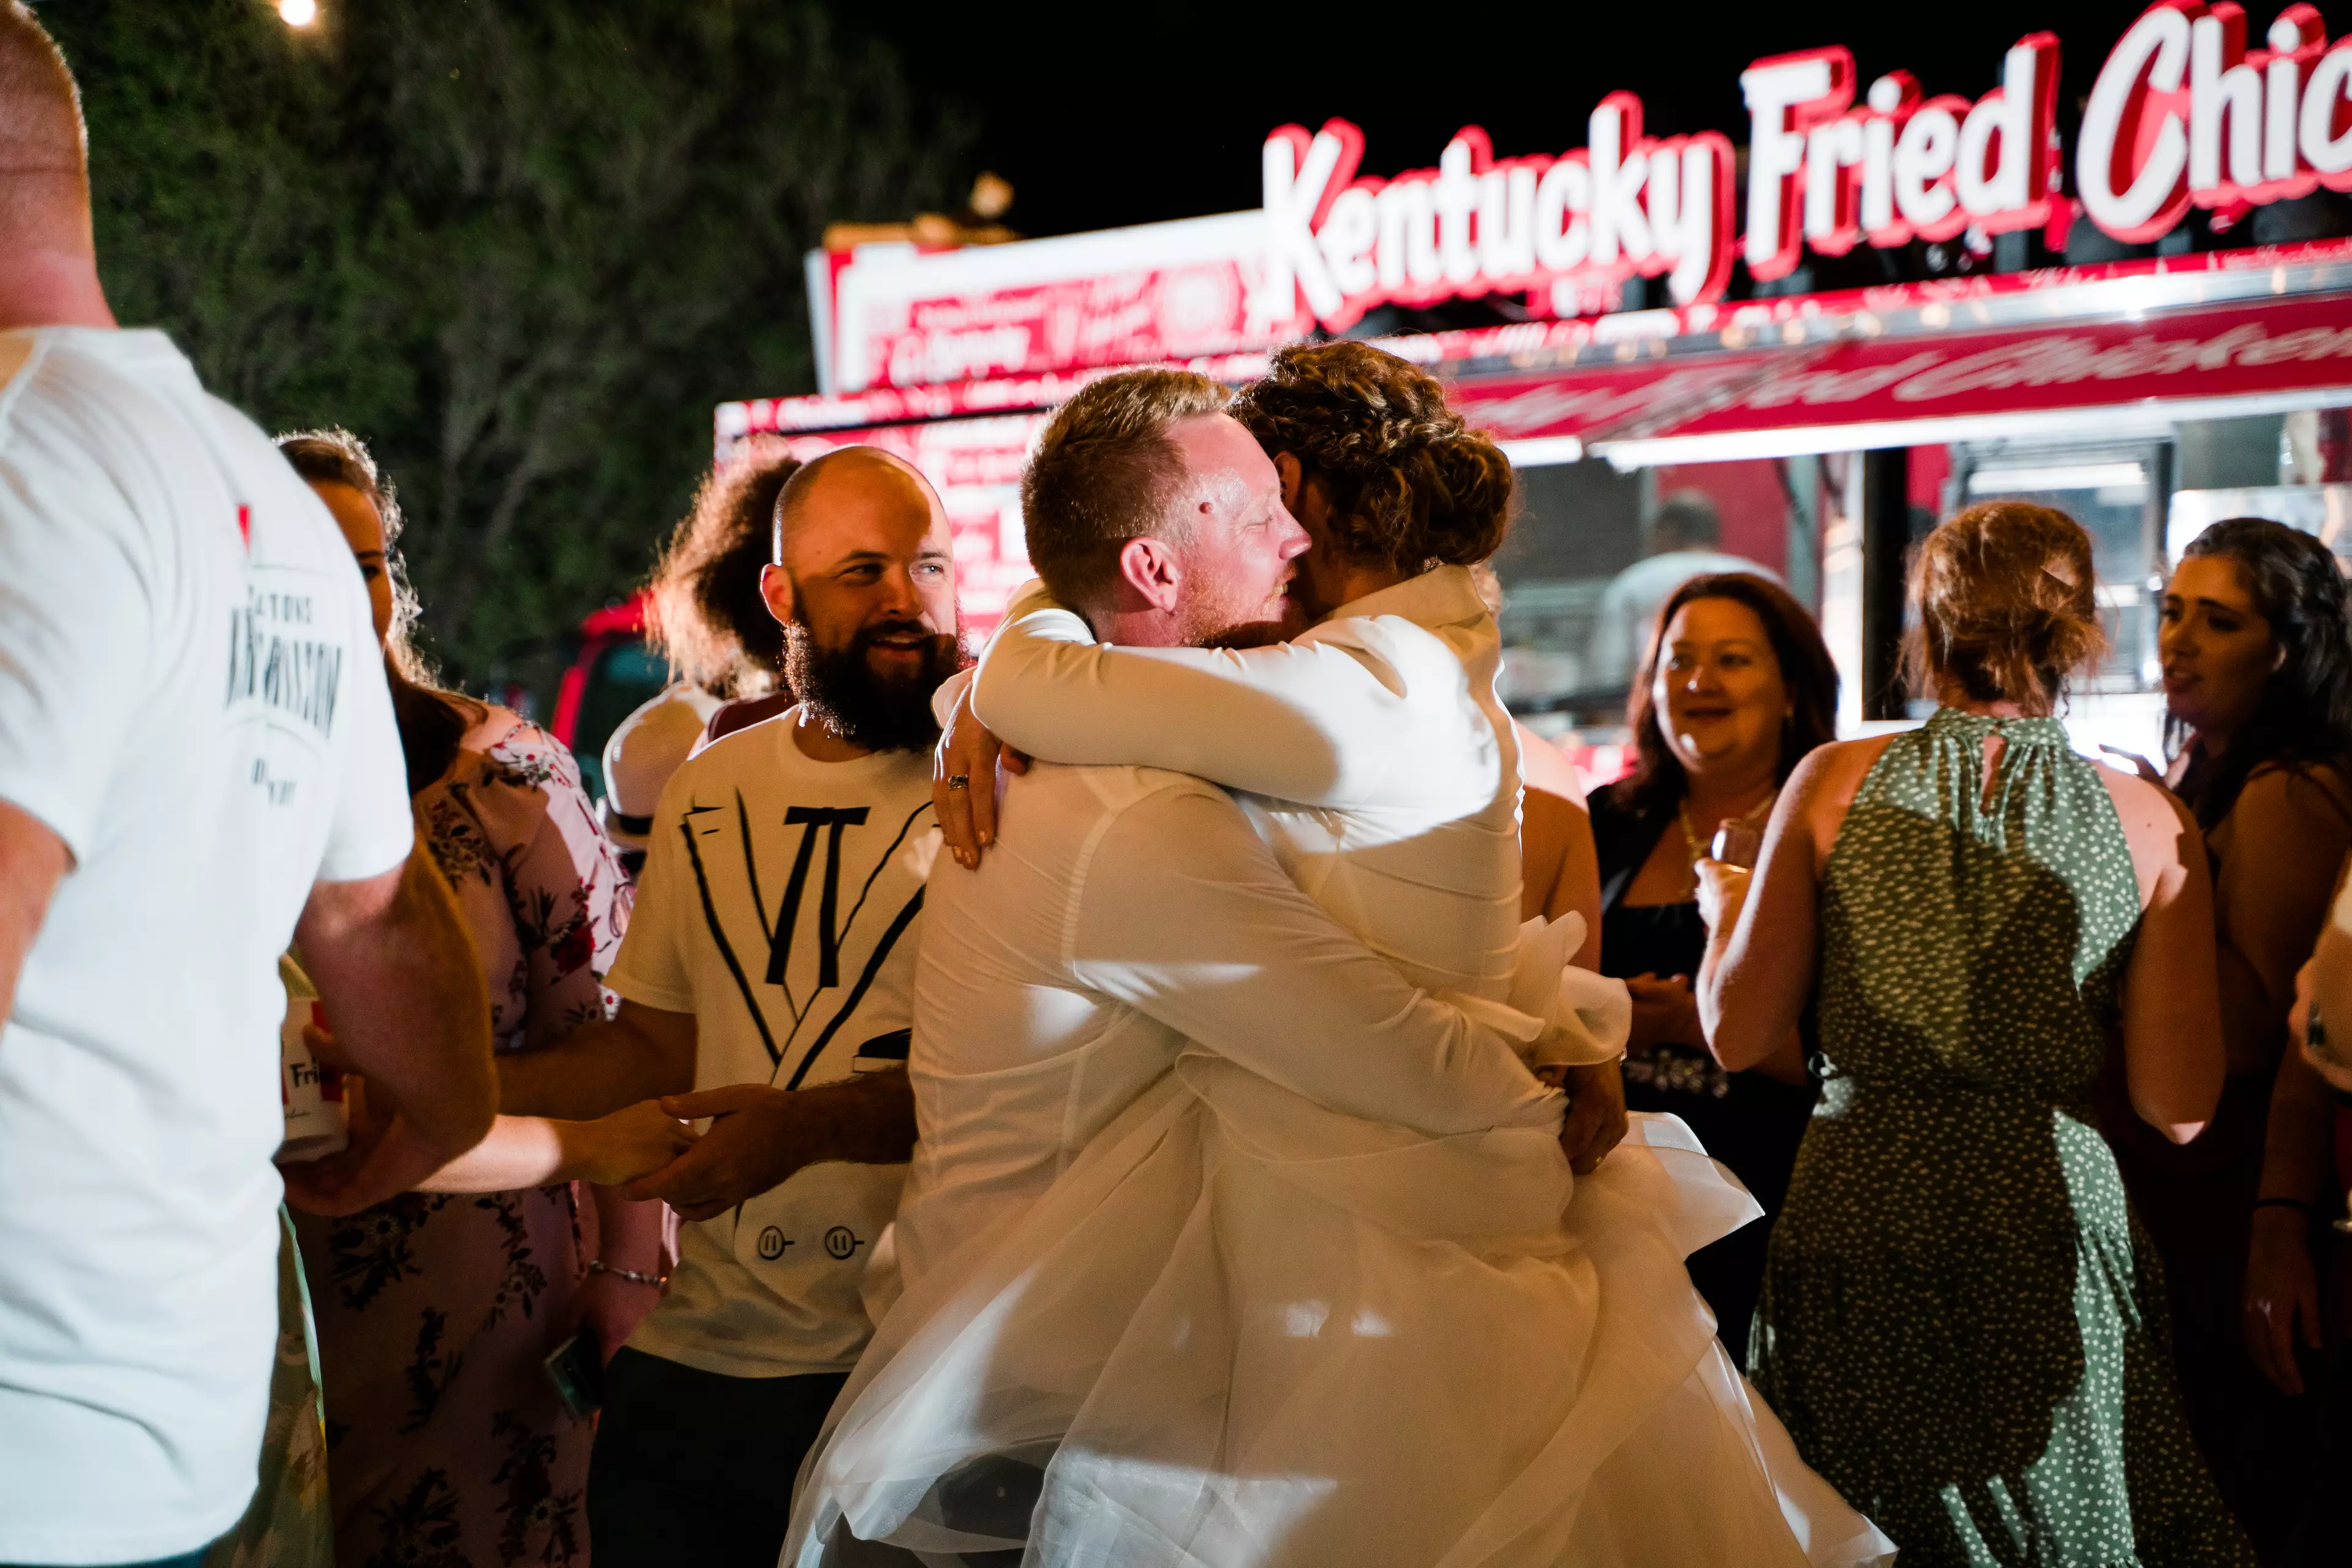 Guests were greeted by an onsite KFC food truck service bucket loads of crispy fried chicken (